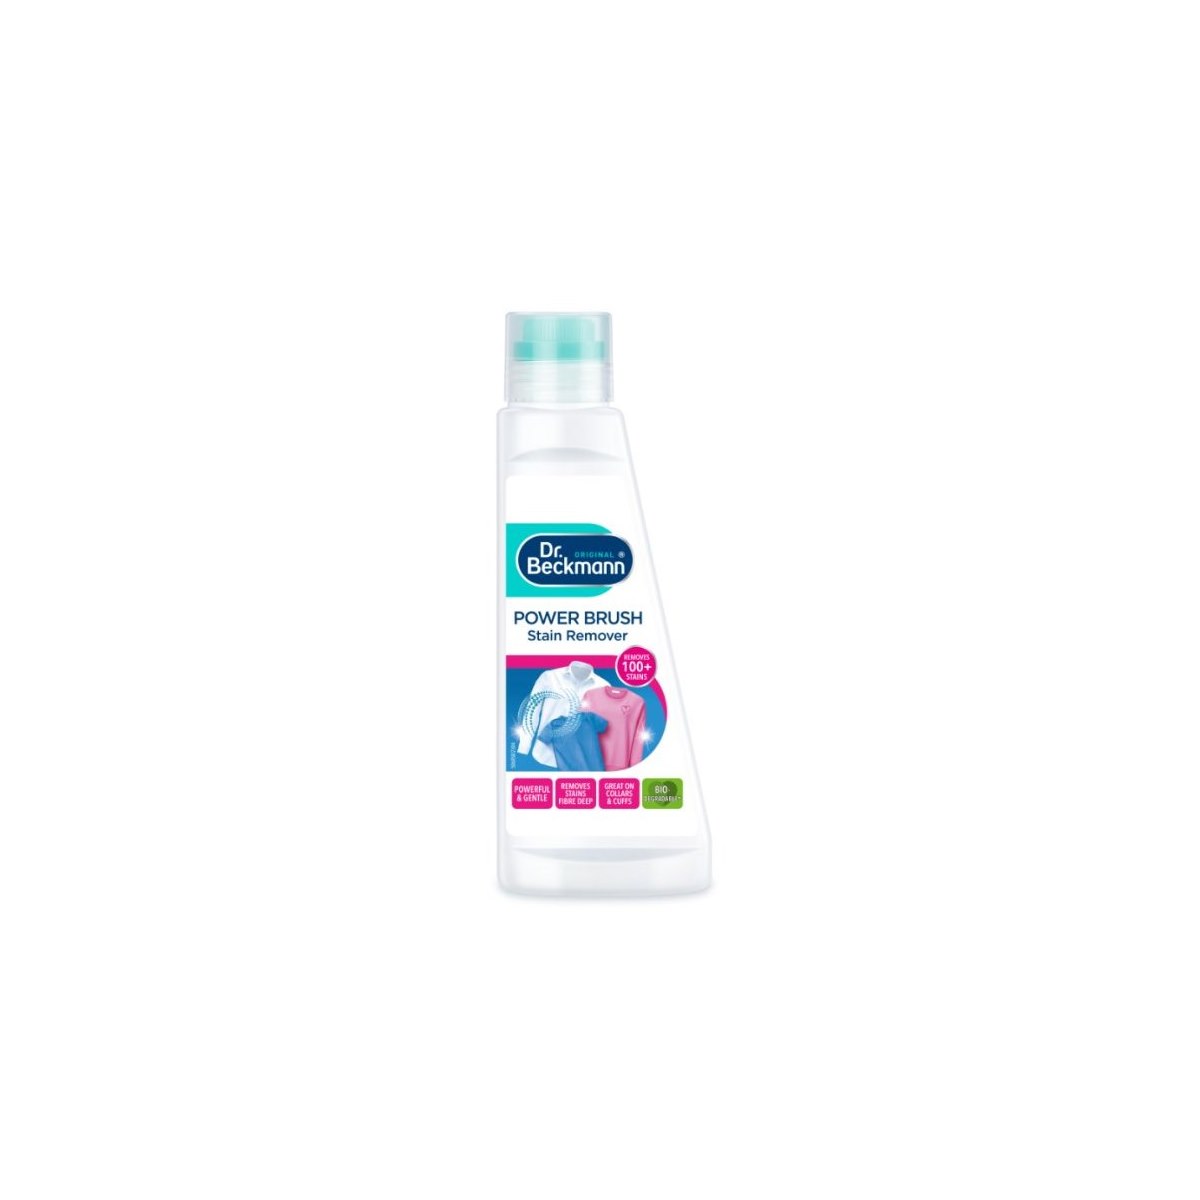 Dr Beckmann Power Brush Stain Remover Pre-Wash 250ml